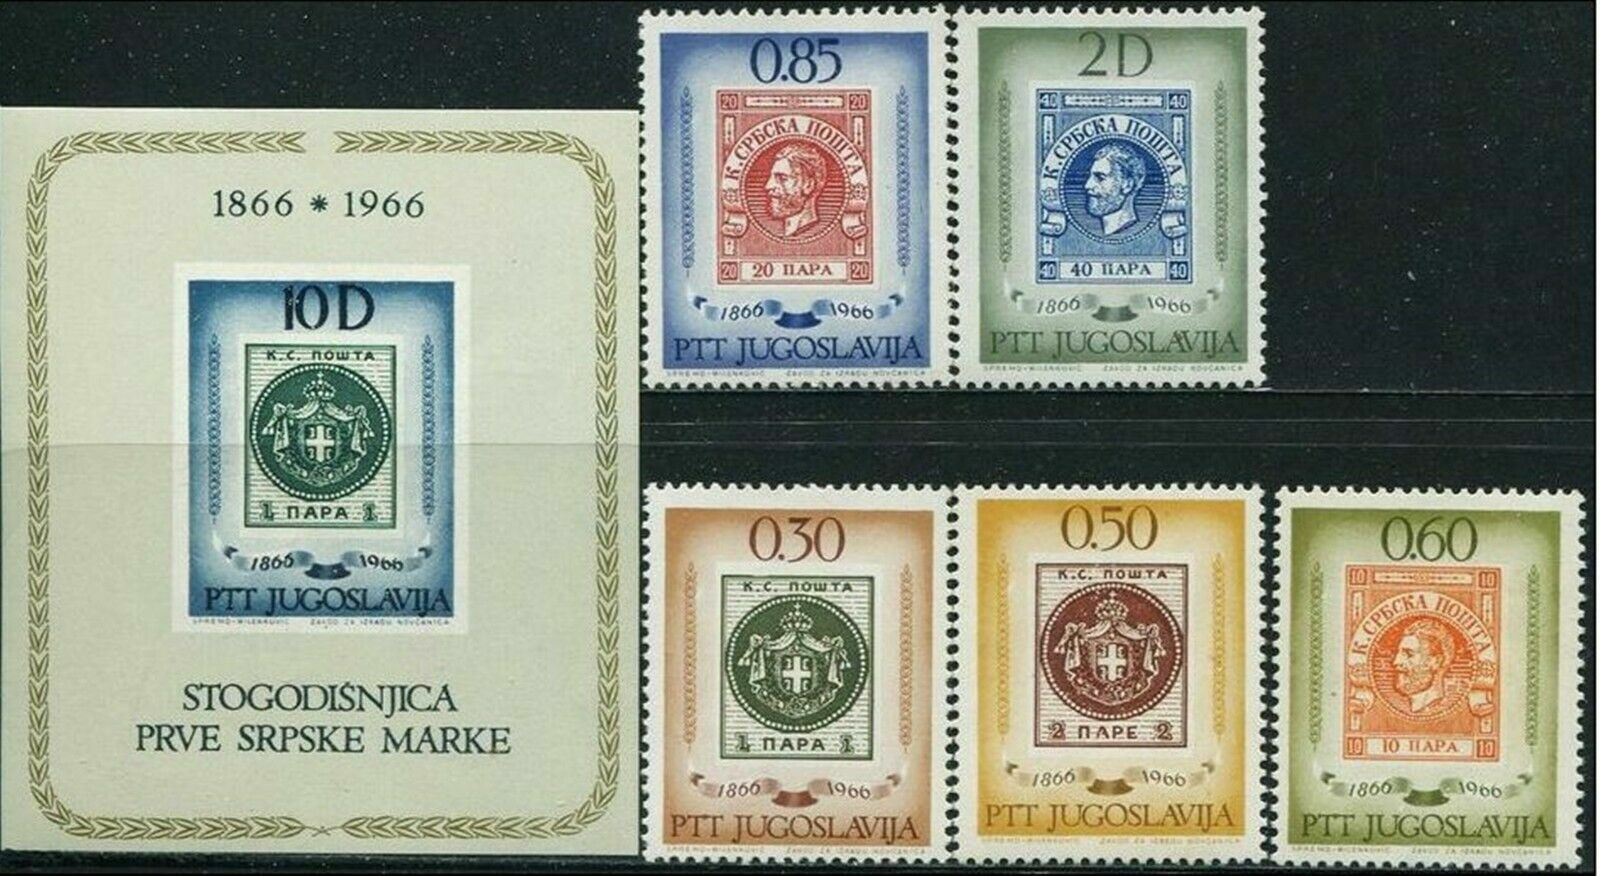 Yugoslavia Max 51% OFF 1966 ☀ 100 years since At the price compl Serbian - 1st stamps